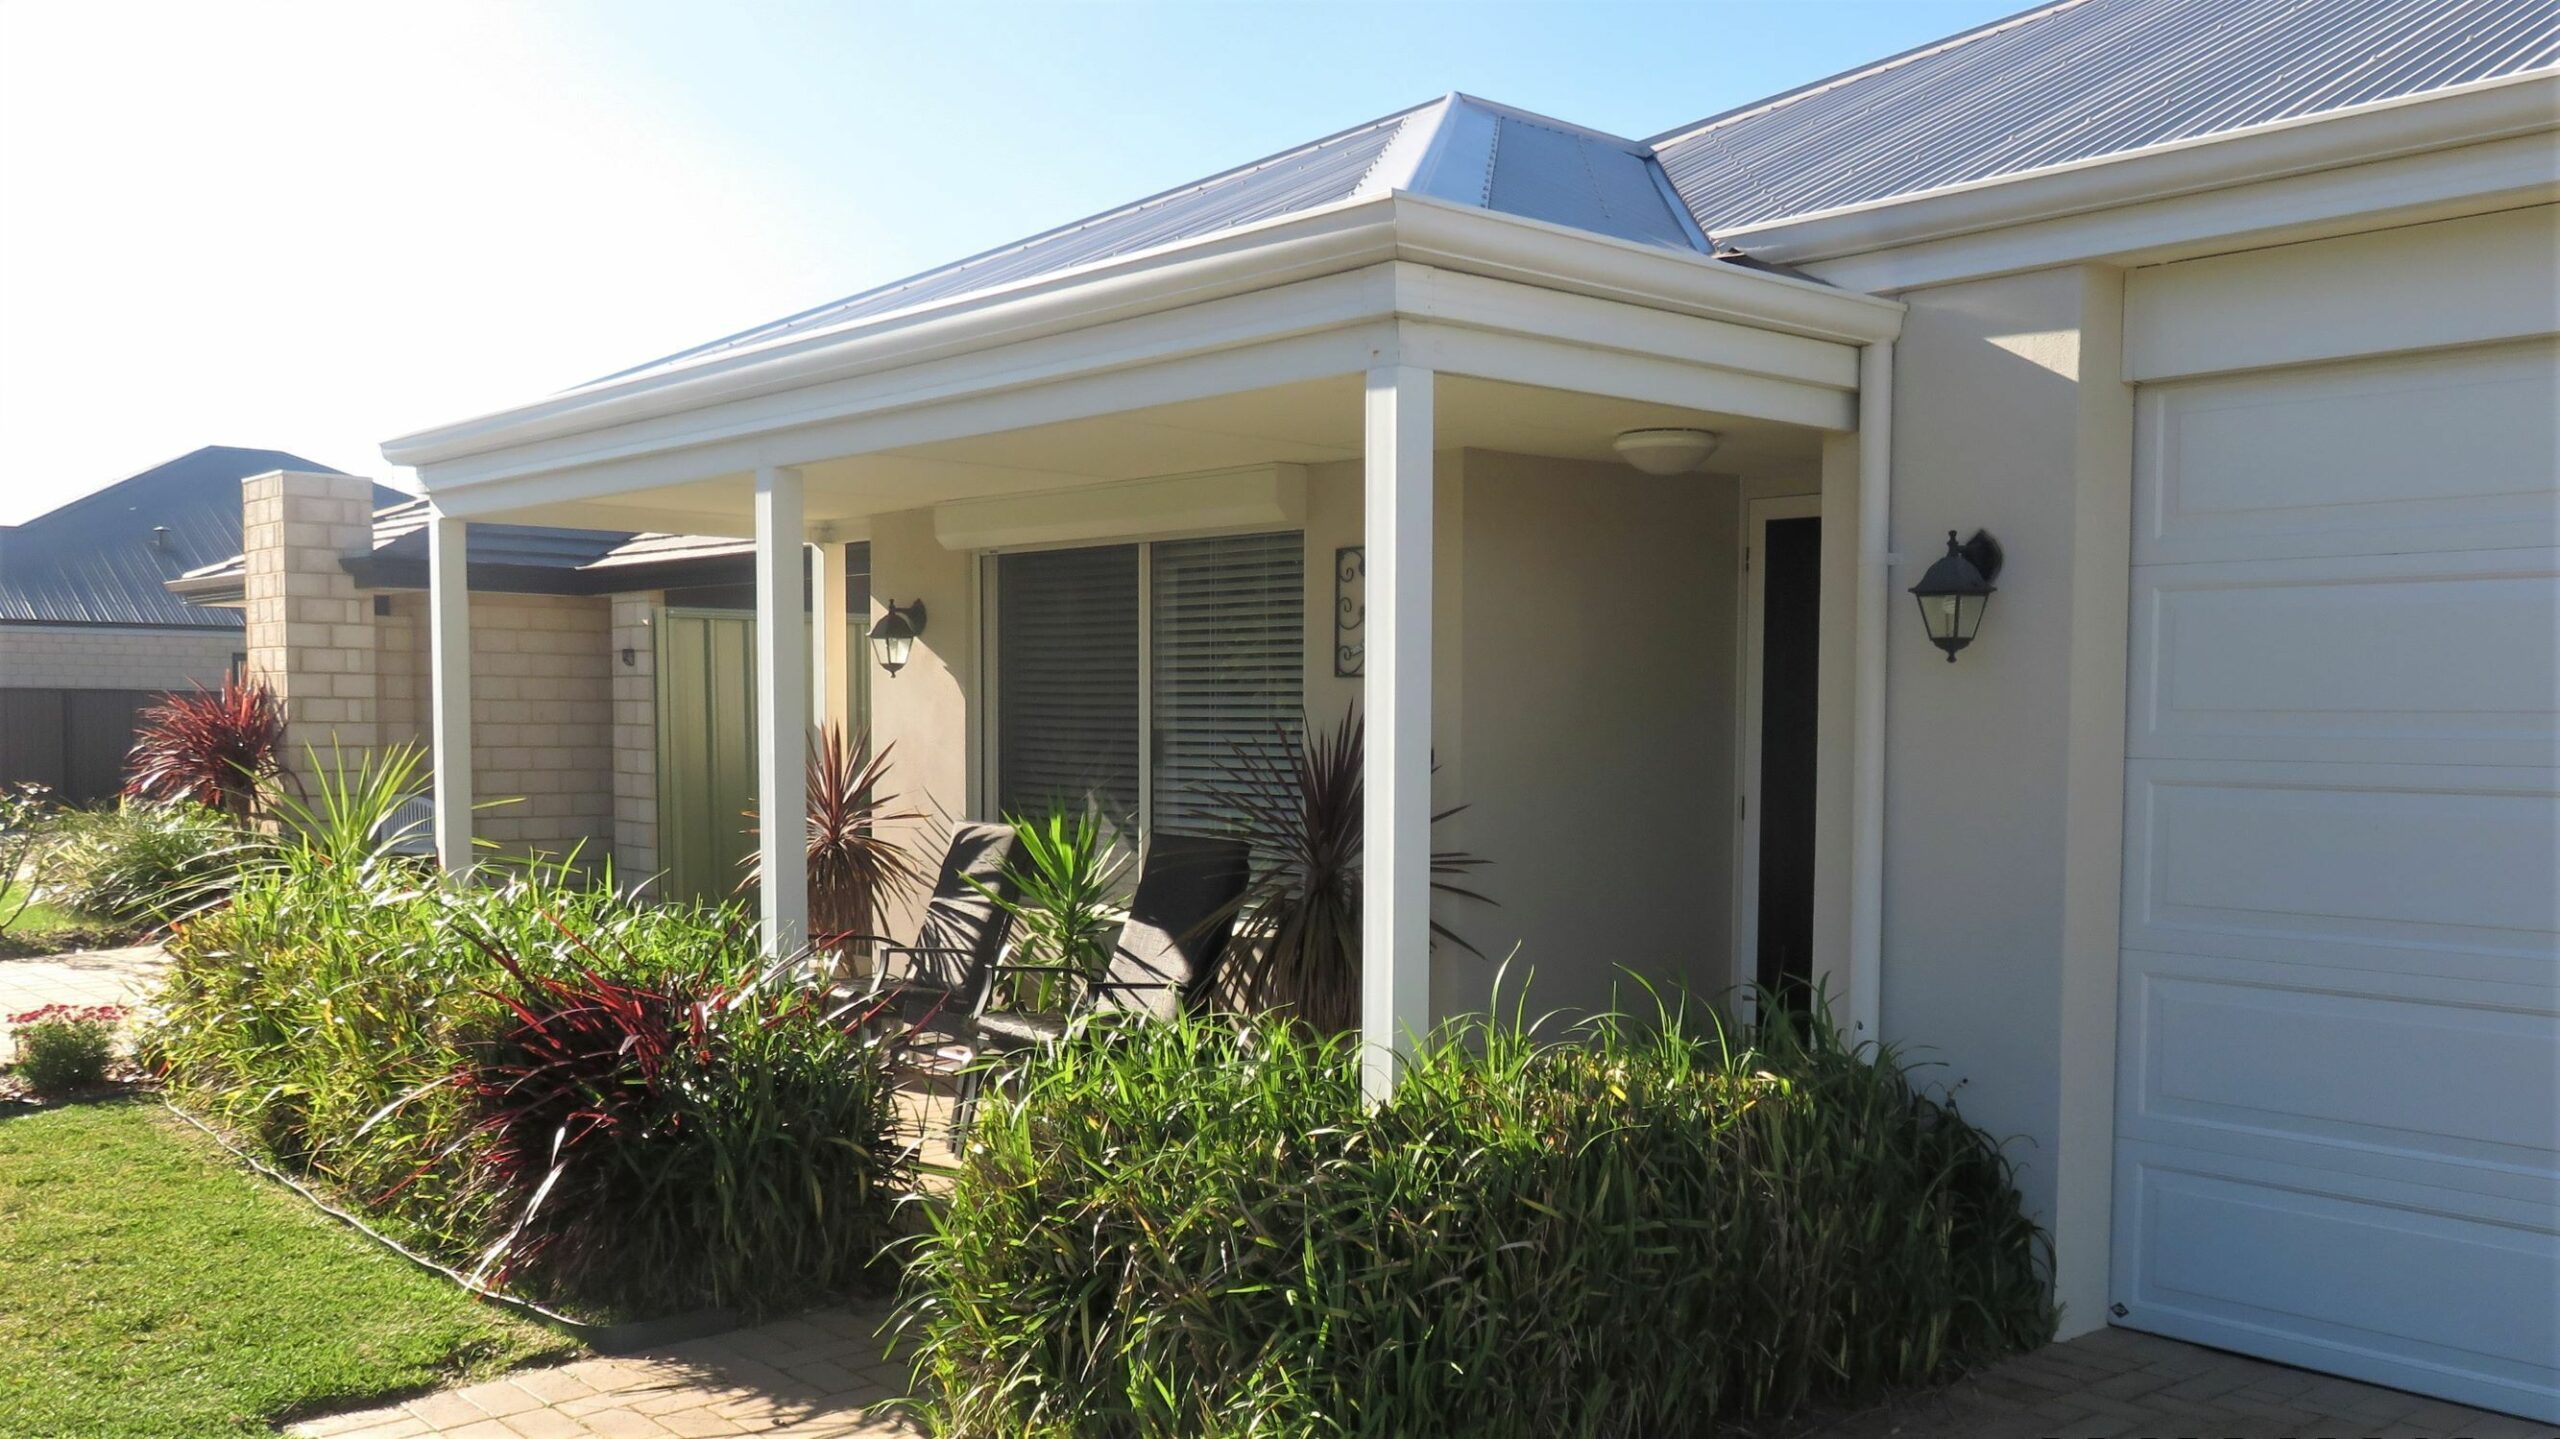 Southern River Bed & Breakfast. An Experience, not just a place to stay